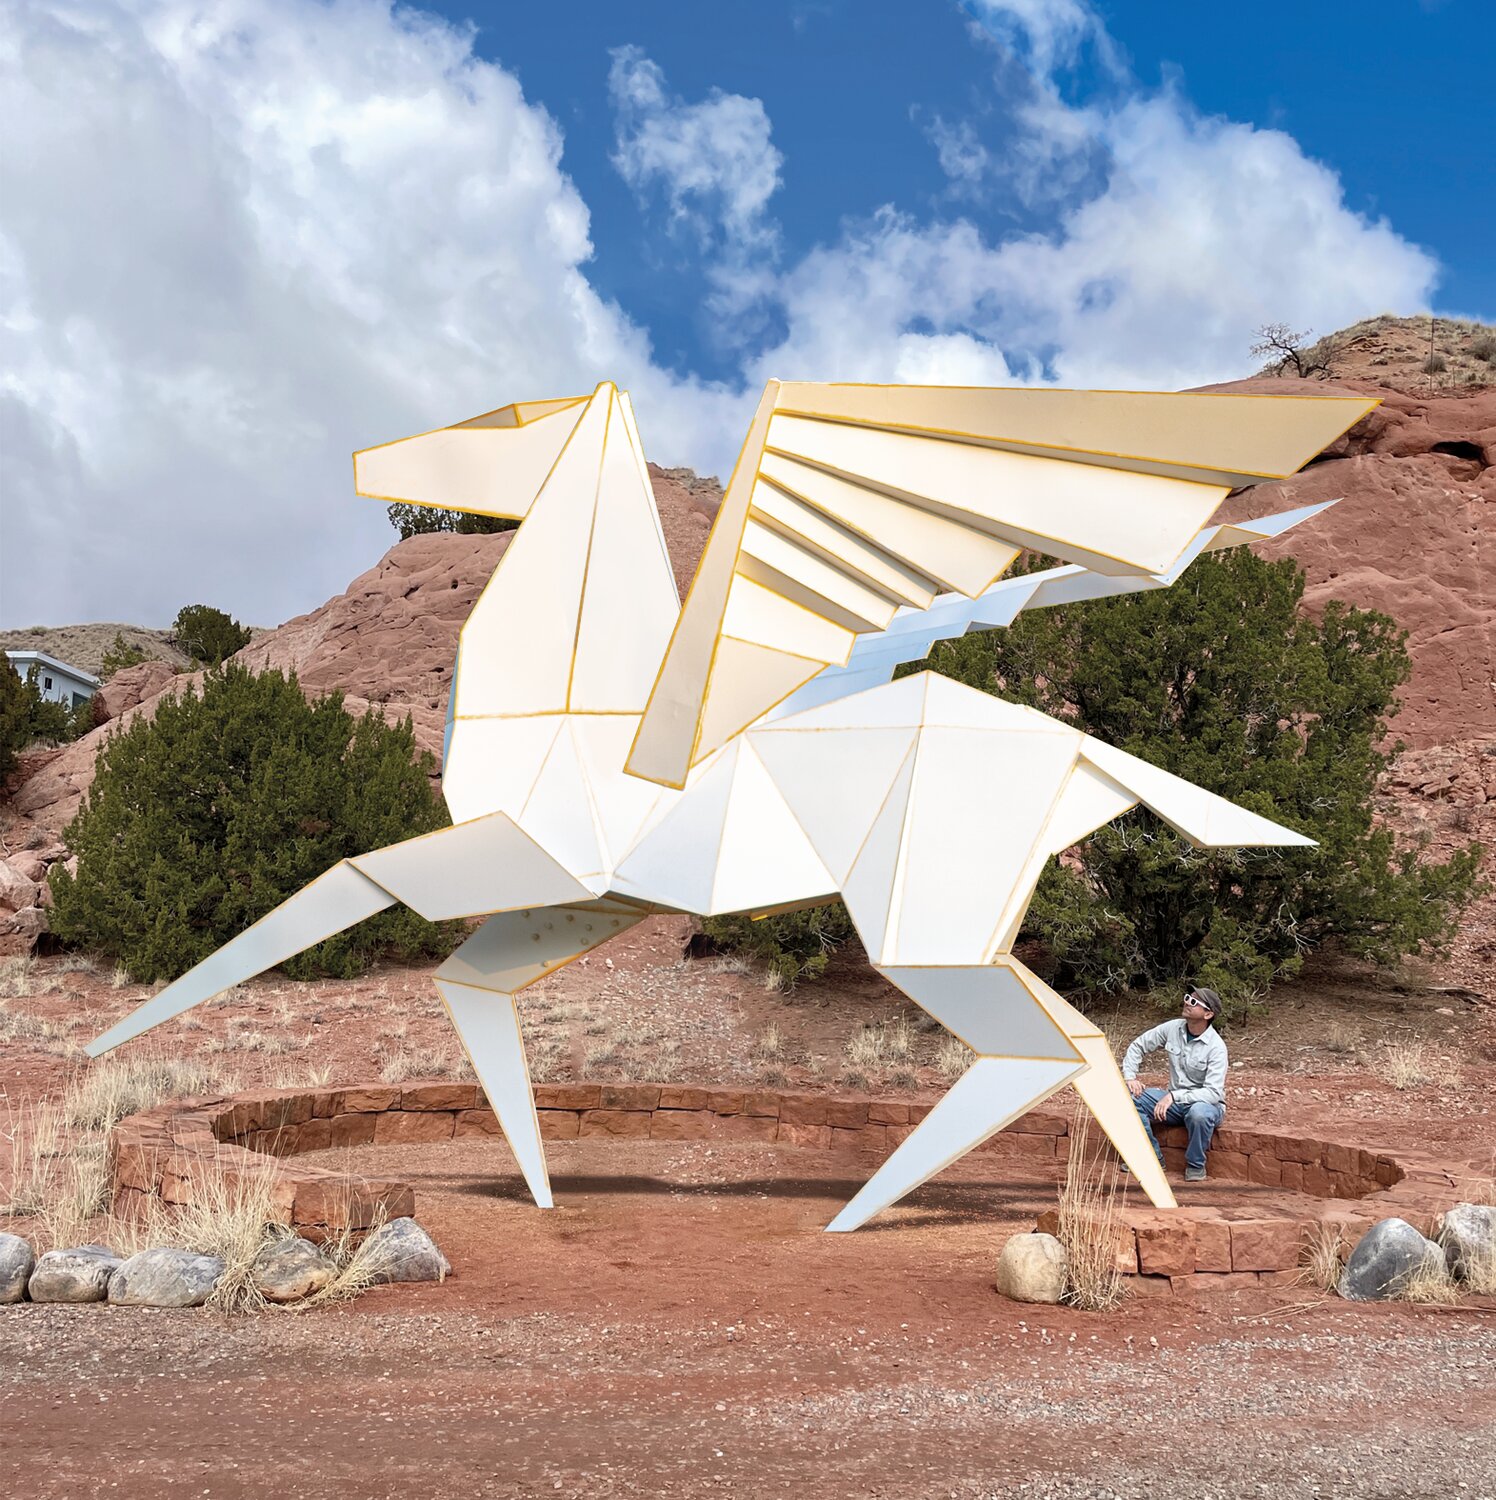 Kevin Box's monumental scale metal sculptures at the Origami in the Garden studio is one of the thirty -six artist in residence stops offered on the self-guided studio tour along the famed Turquoise Trail.